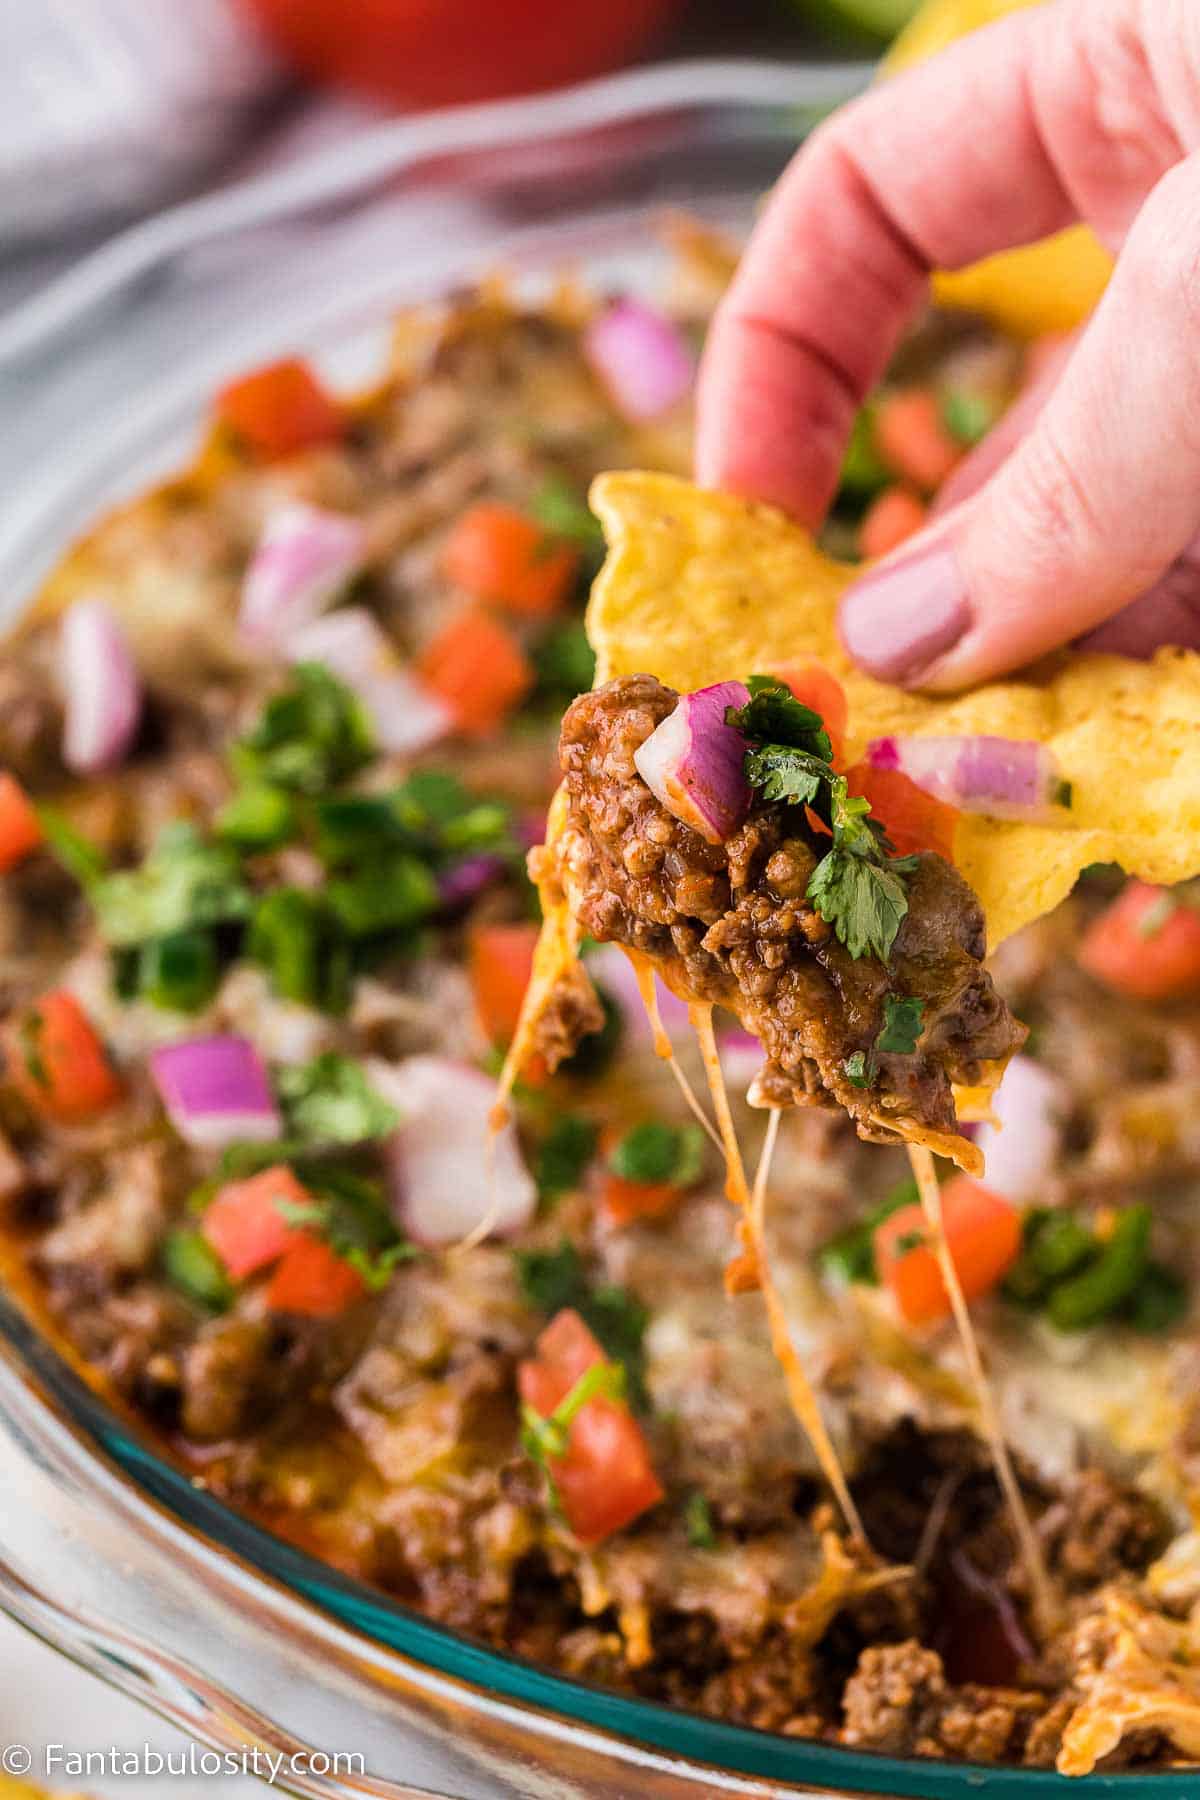 Hot taco dip being lifted out of baking dish with a chip.